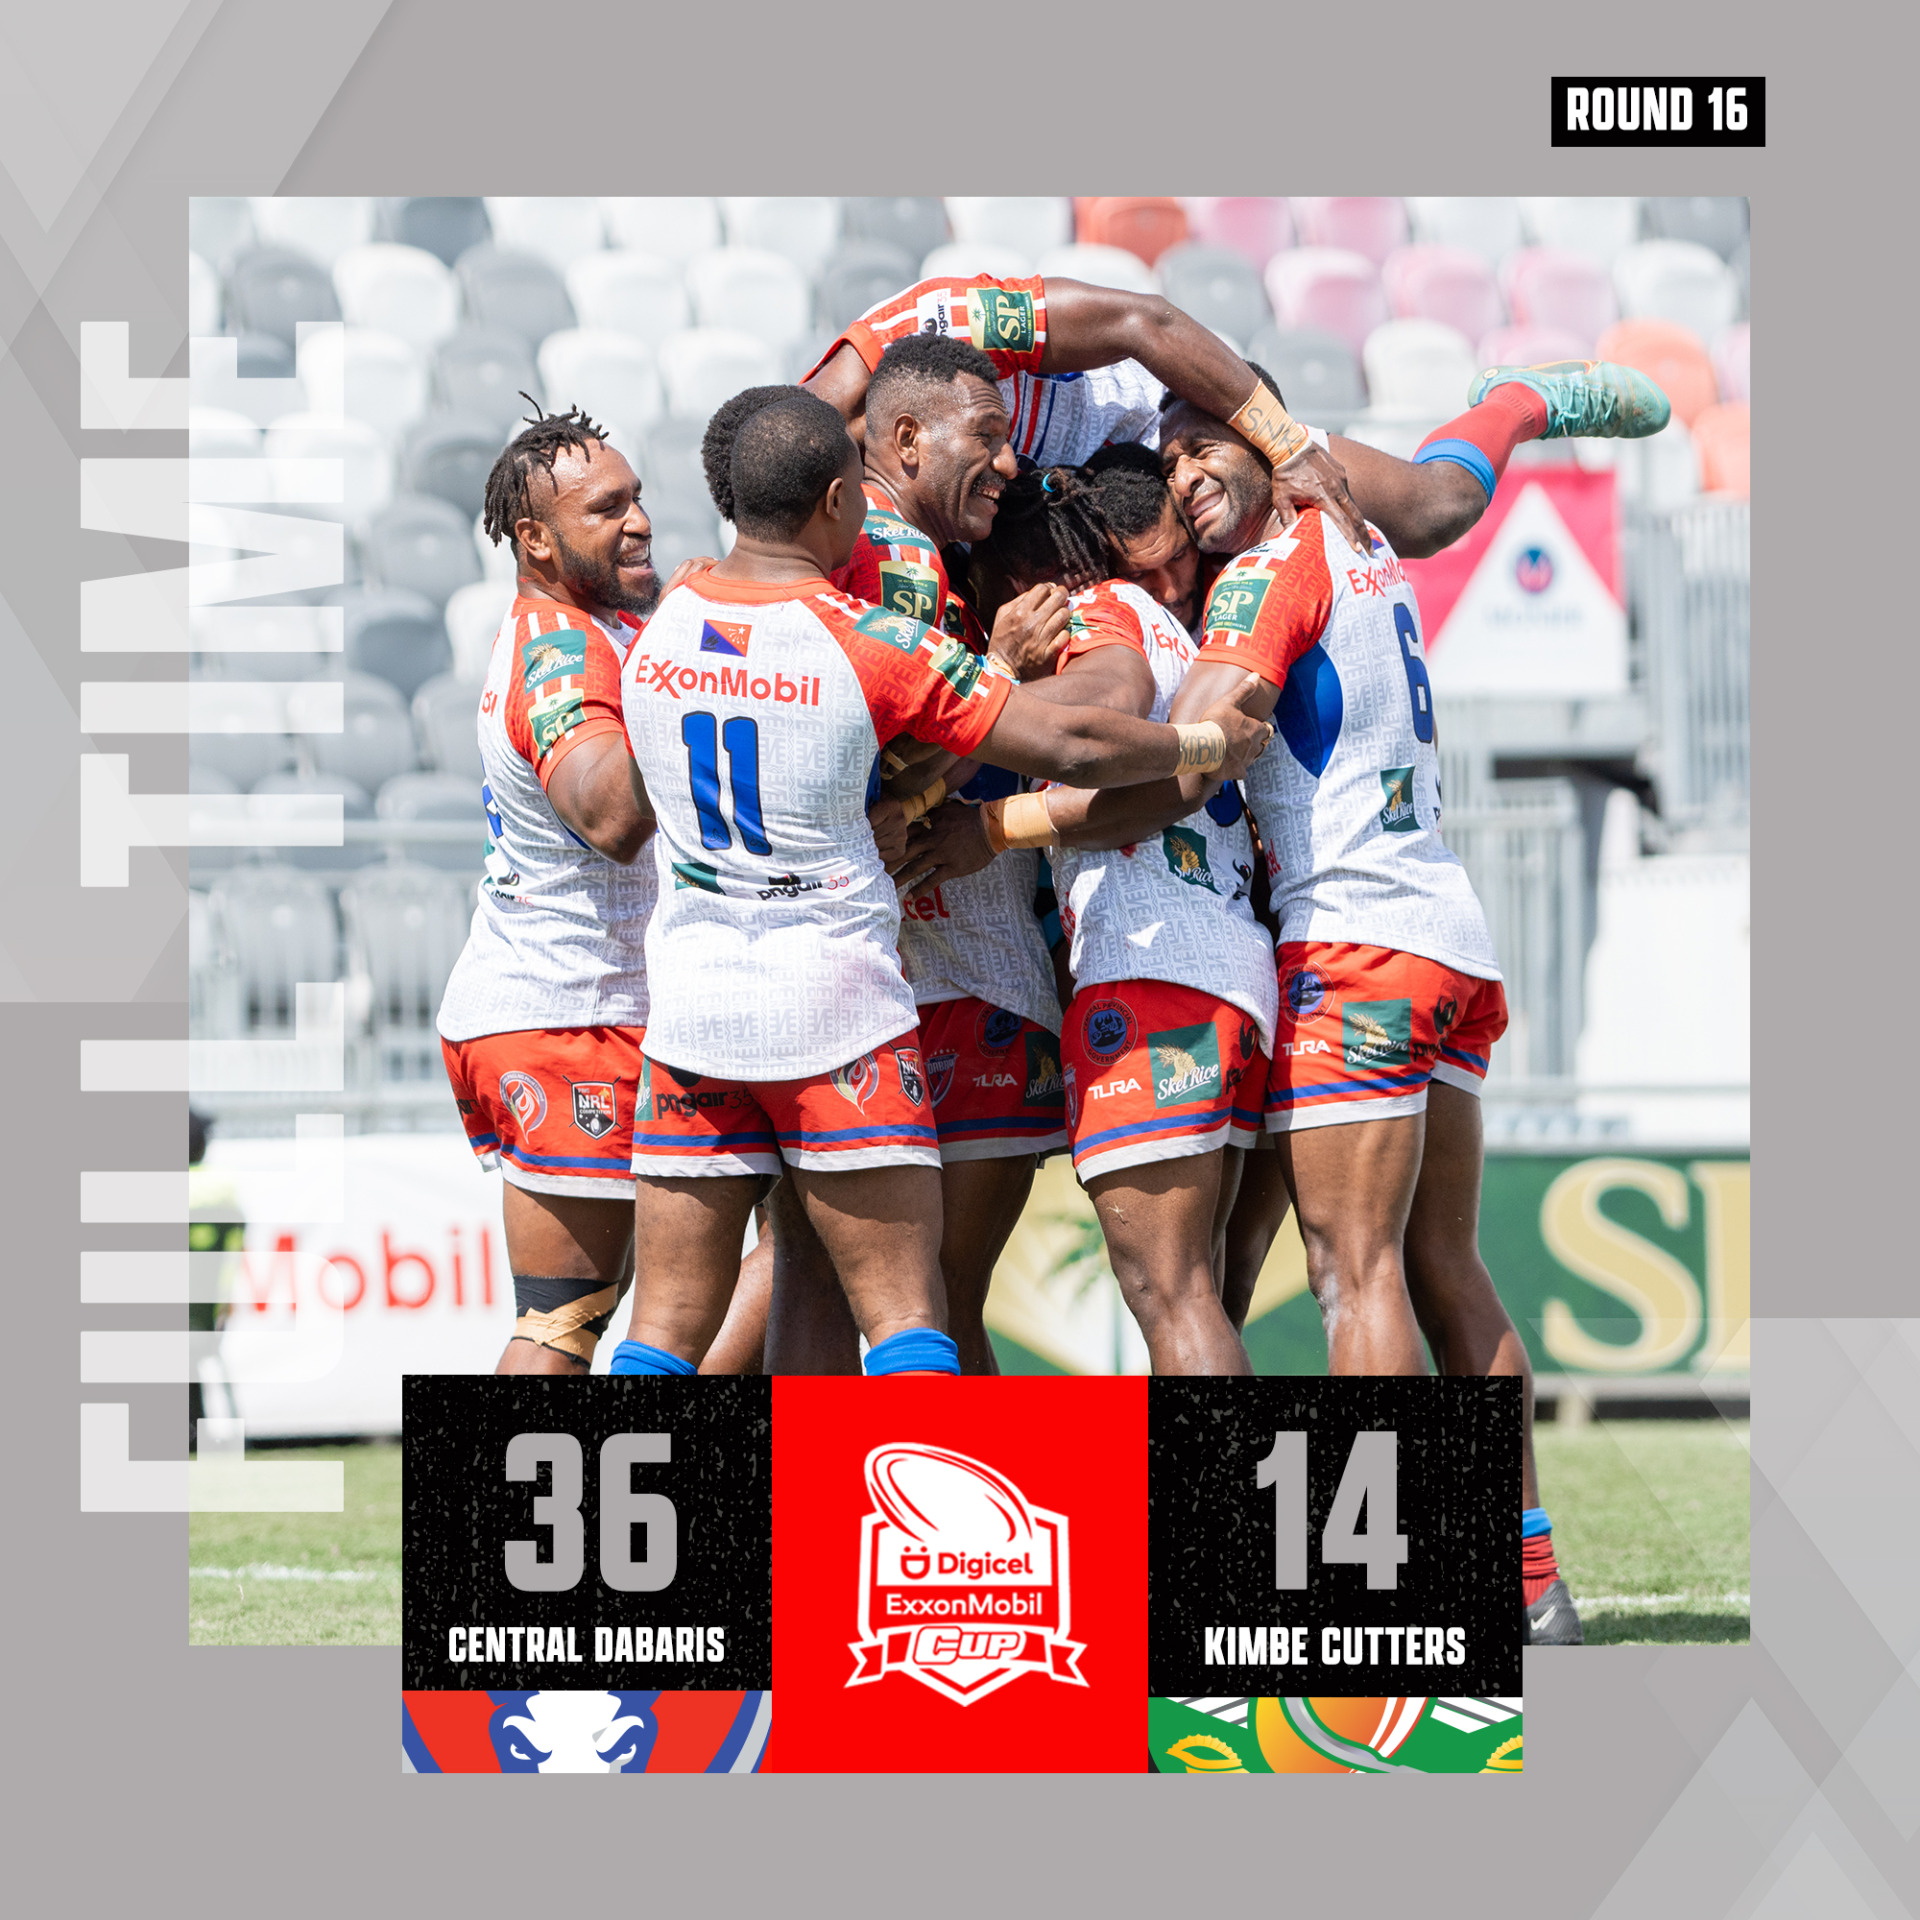 Game 1 of Round 16 of the 2023 Digicel ExxonMobil Cup today, sees the Central Dabaris Rugby League take the two points 36-14 over the Kimbe Cutters Digicel Cup Franchise at Santos